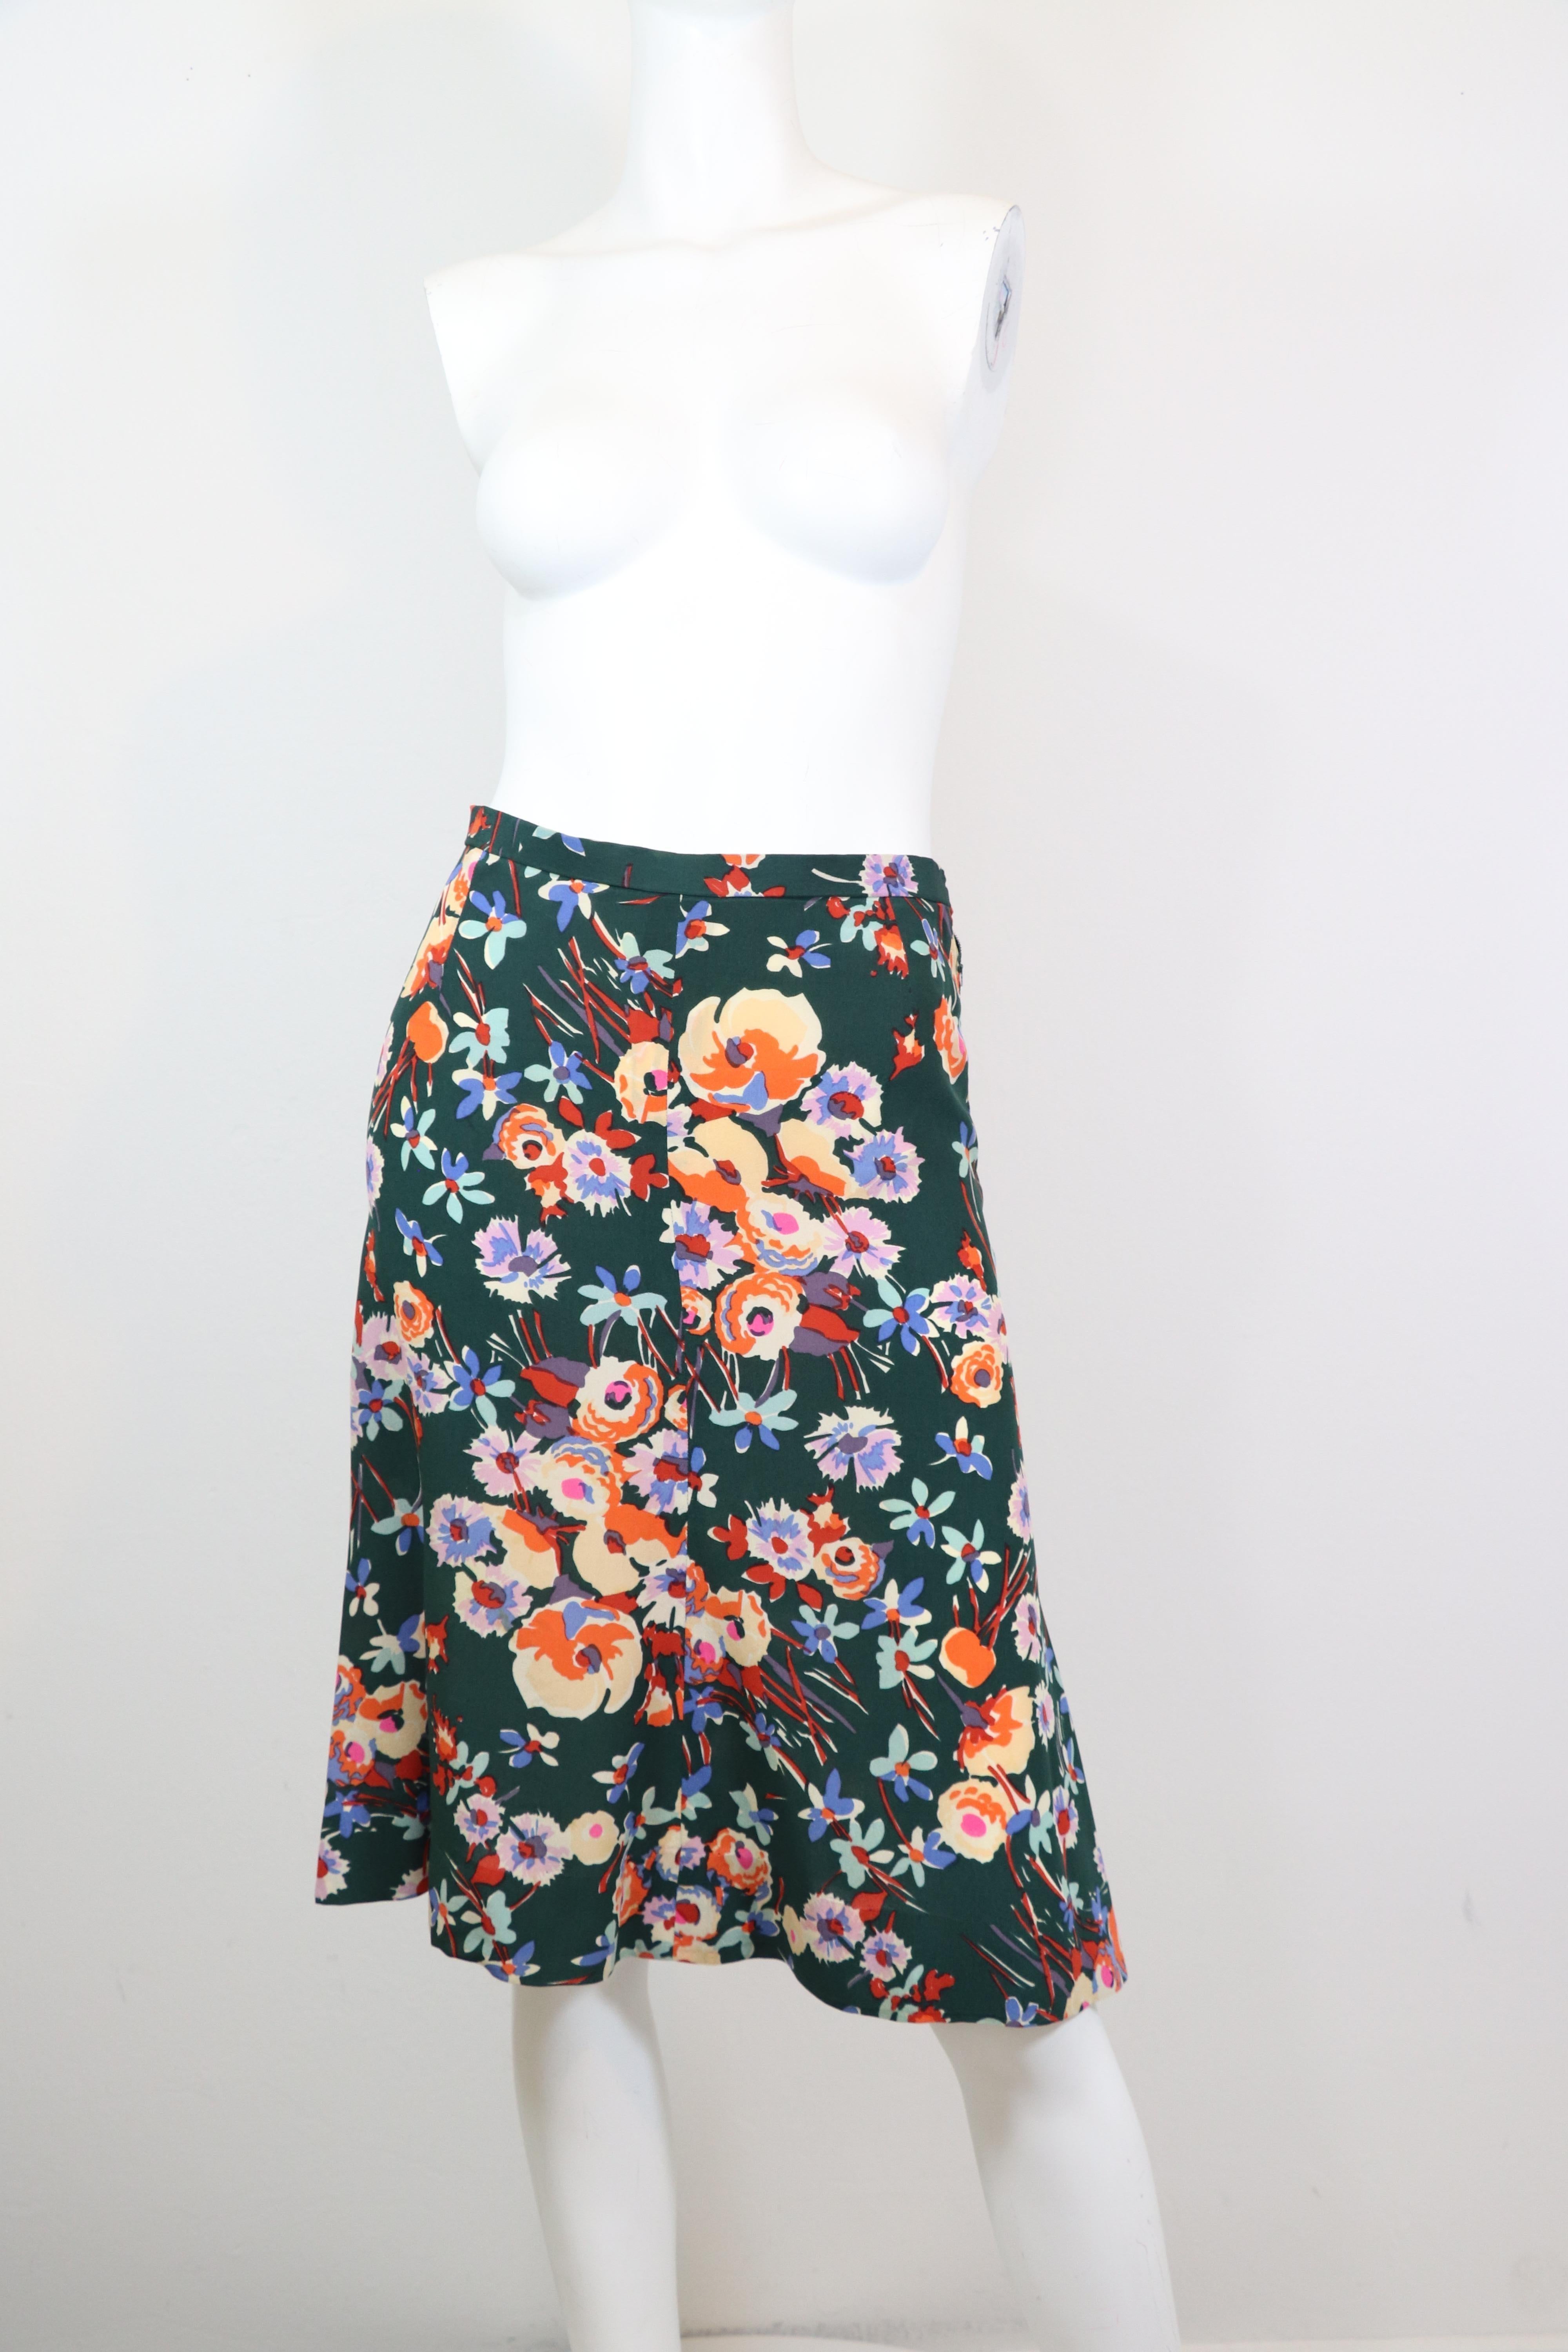 Black Chloe Lagerfeld Early 1970's Vintage Floral Print Skirt and Blouse 38